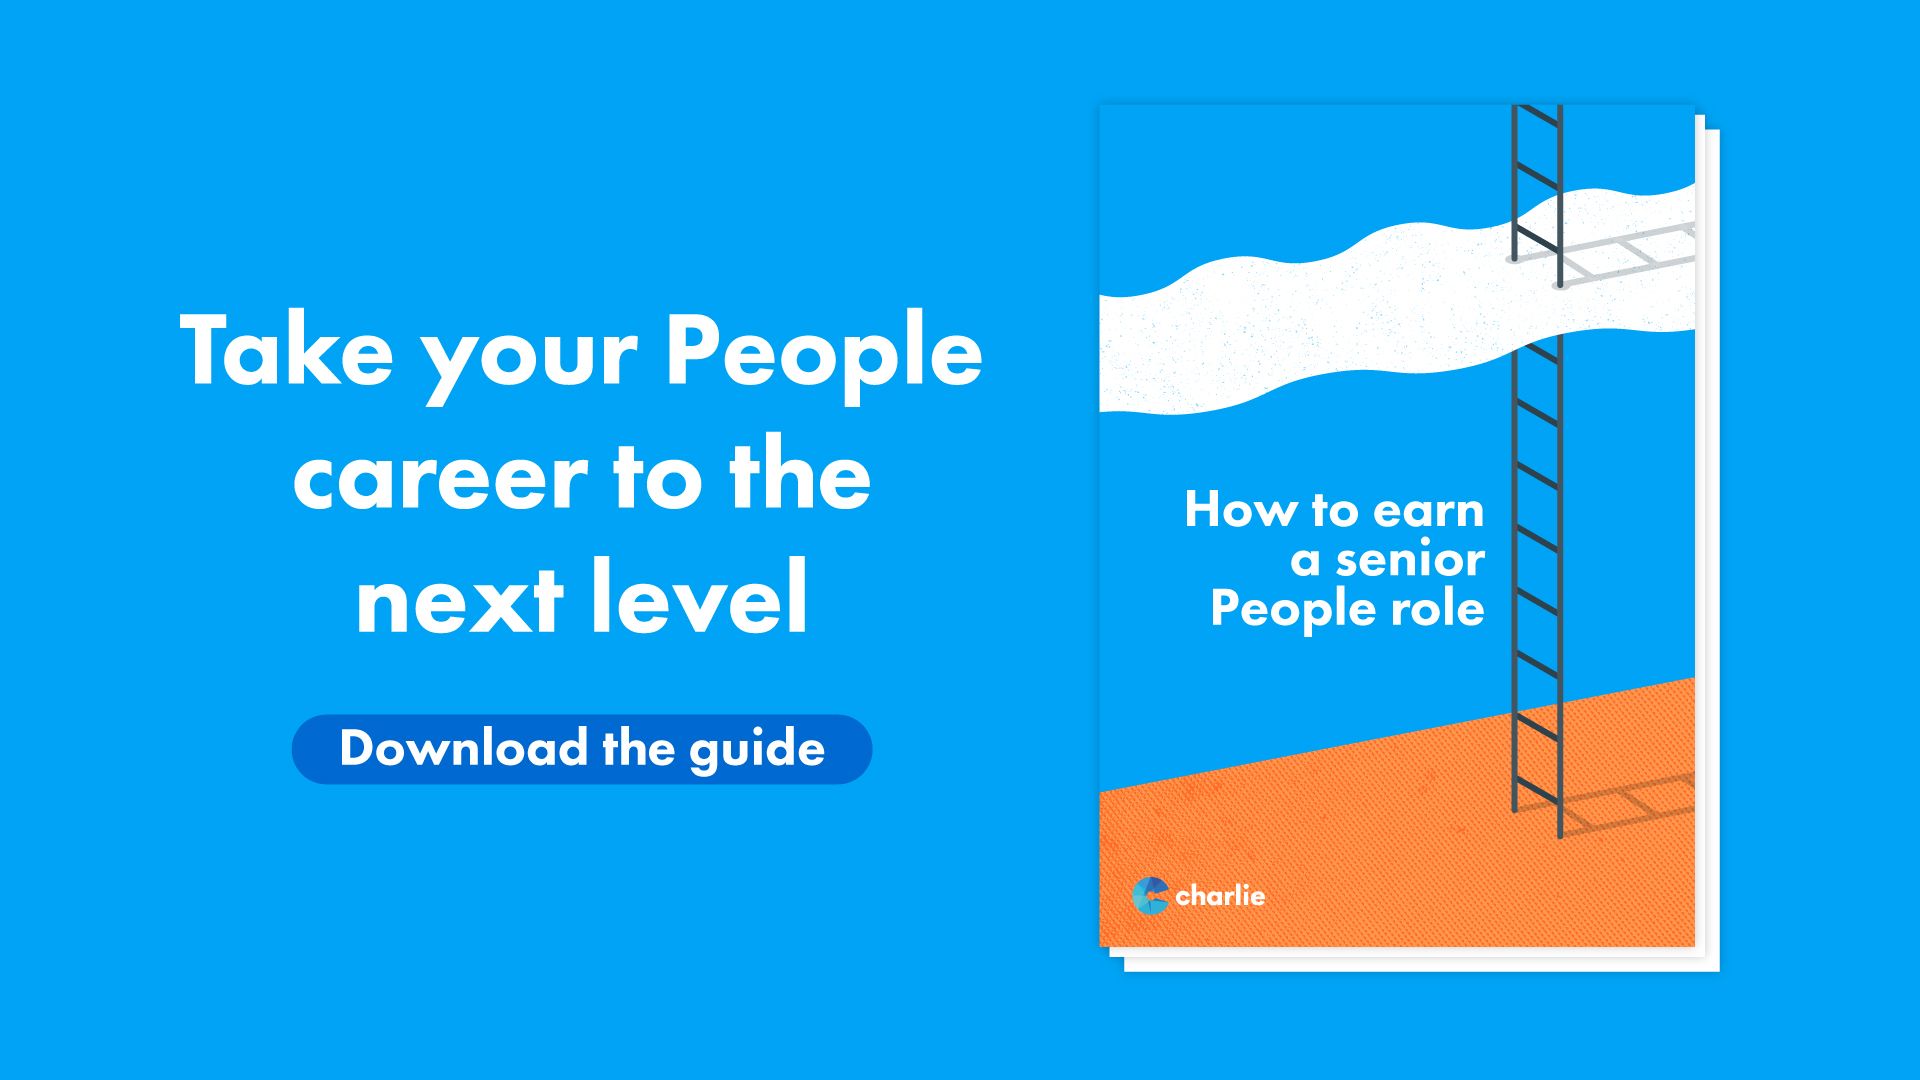 Click here to understand how to earn a senior people role